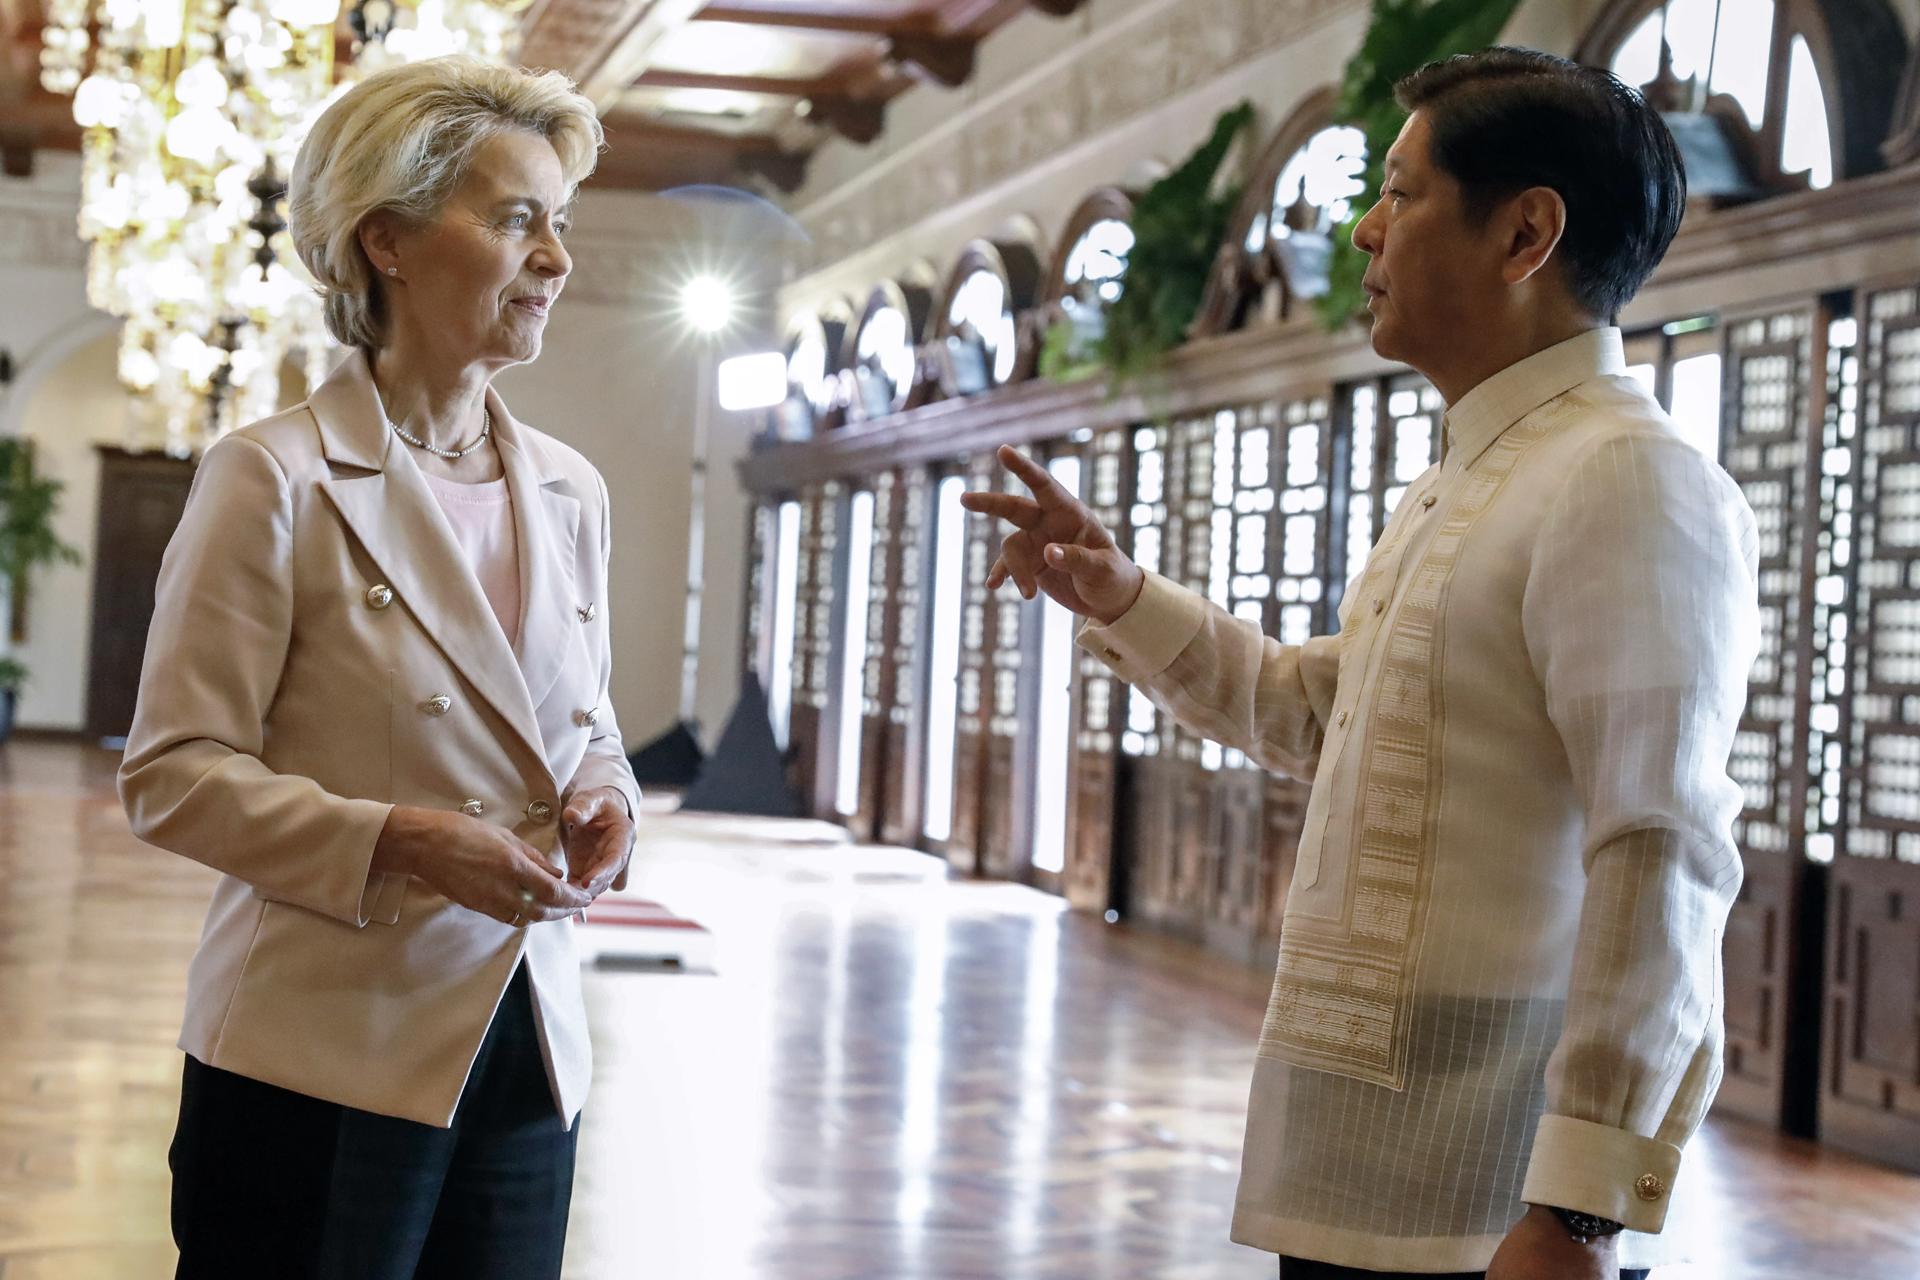 Philippine President Ferdinand Marcos Jr. (R) talks with President of the European Commission Ursula von der Leyen during arrival honors at the Malacanang presidential palace in Manila, Philippines 31 July 2023. EFE/EPA/ROLEX DELA PENA/POOL
